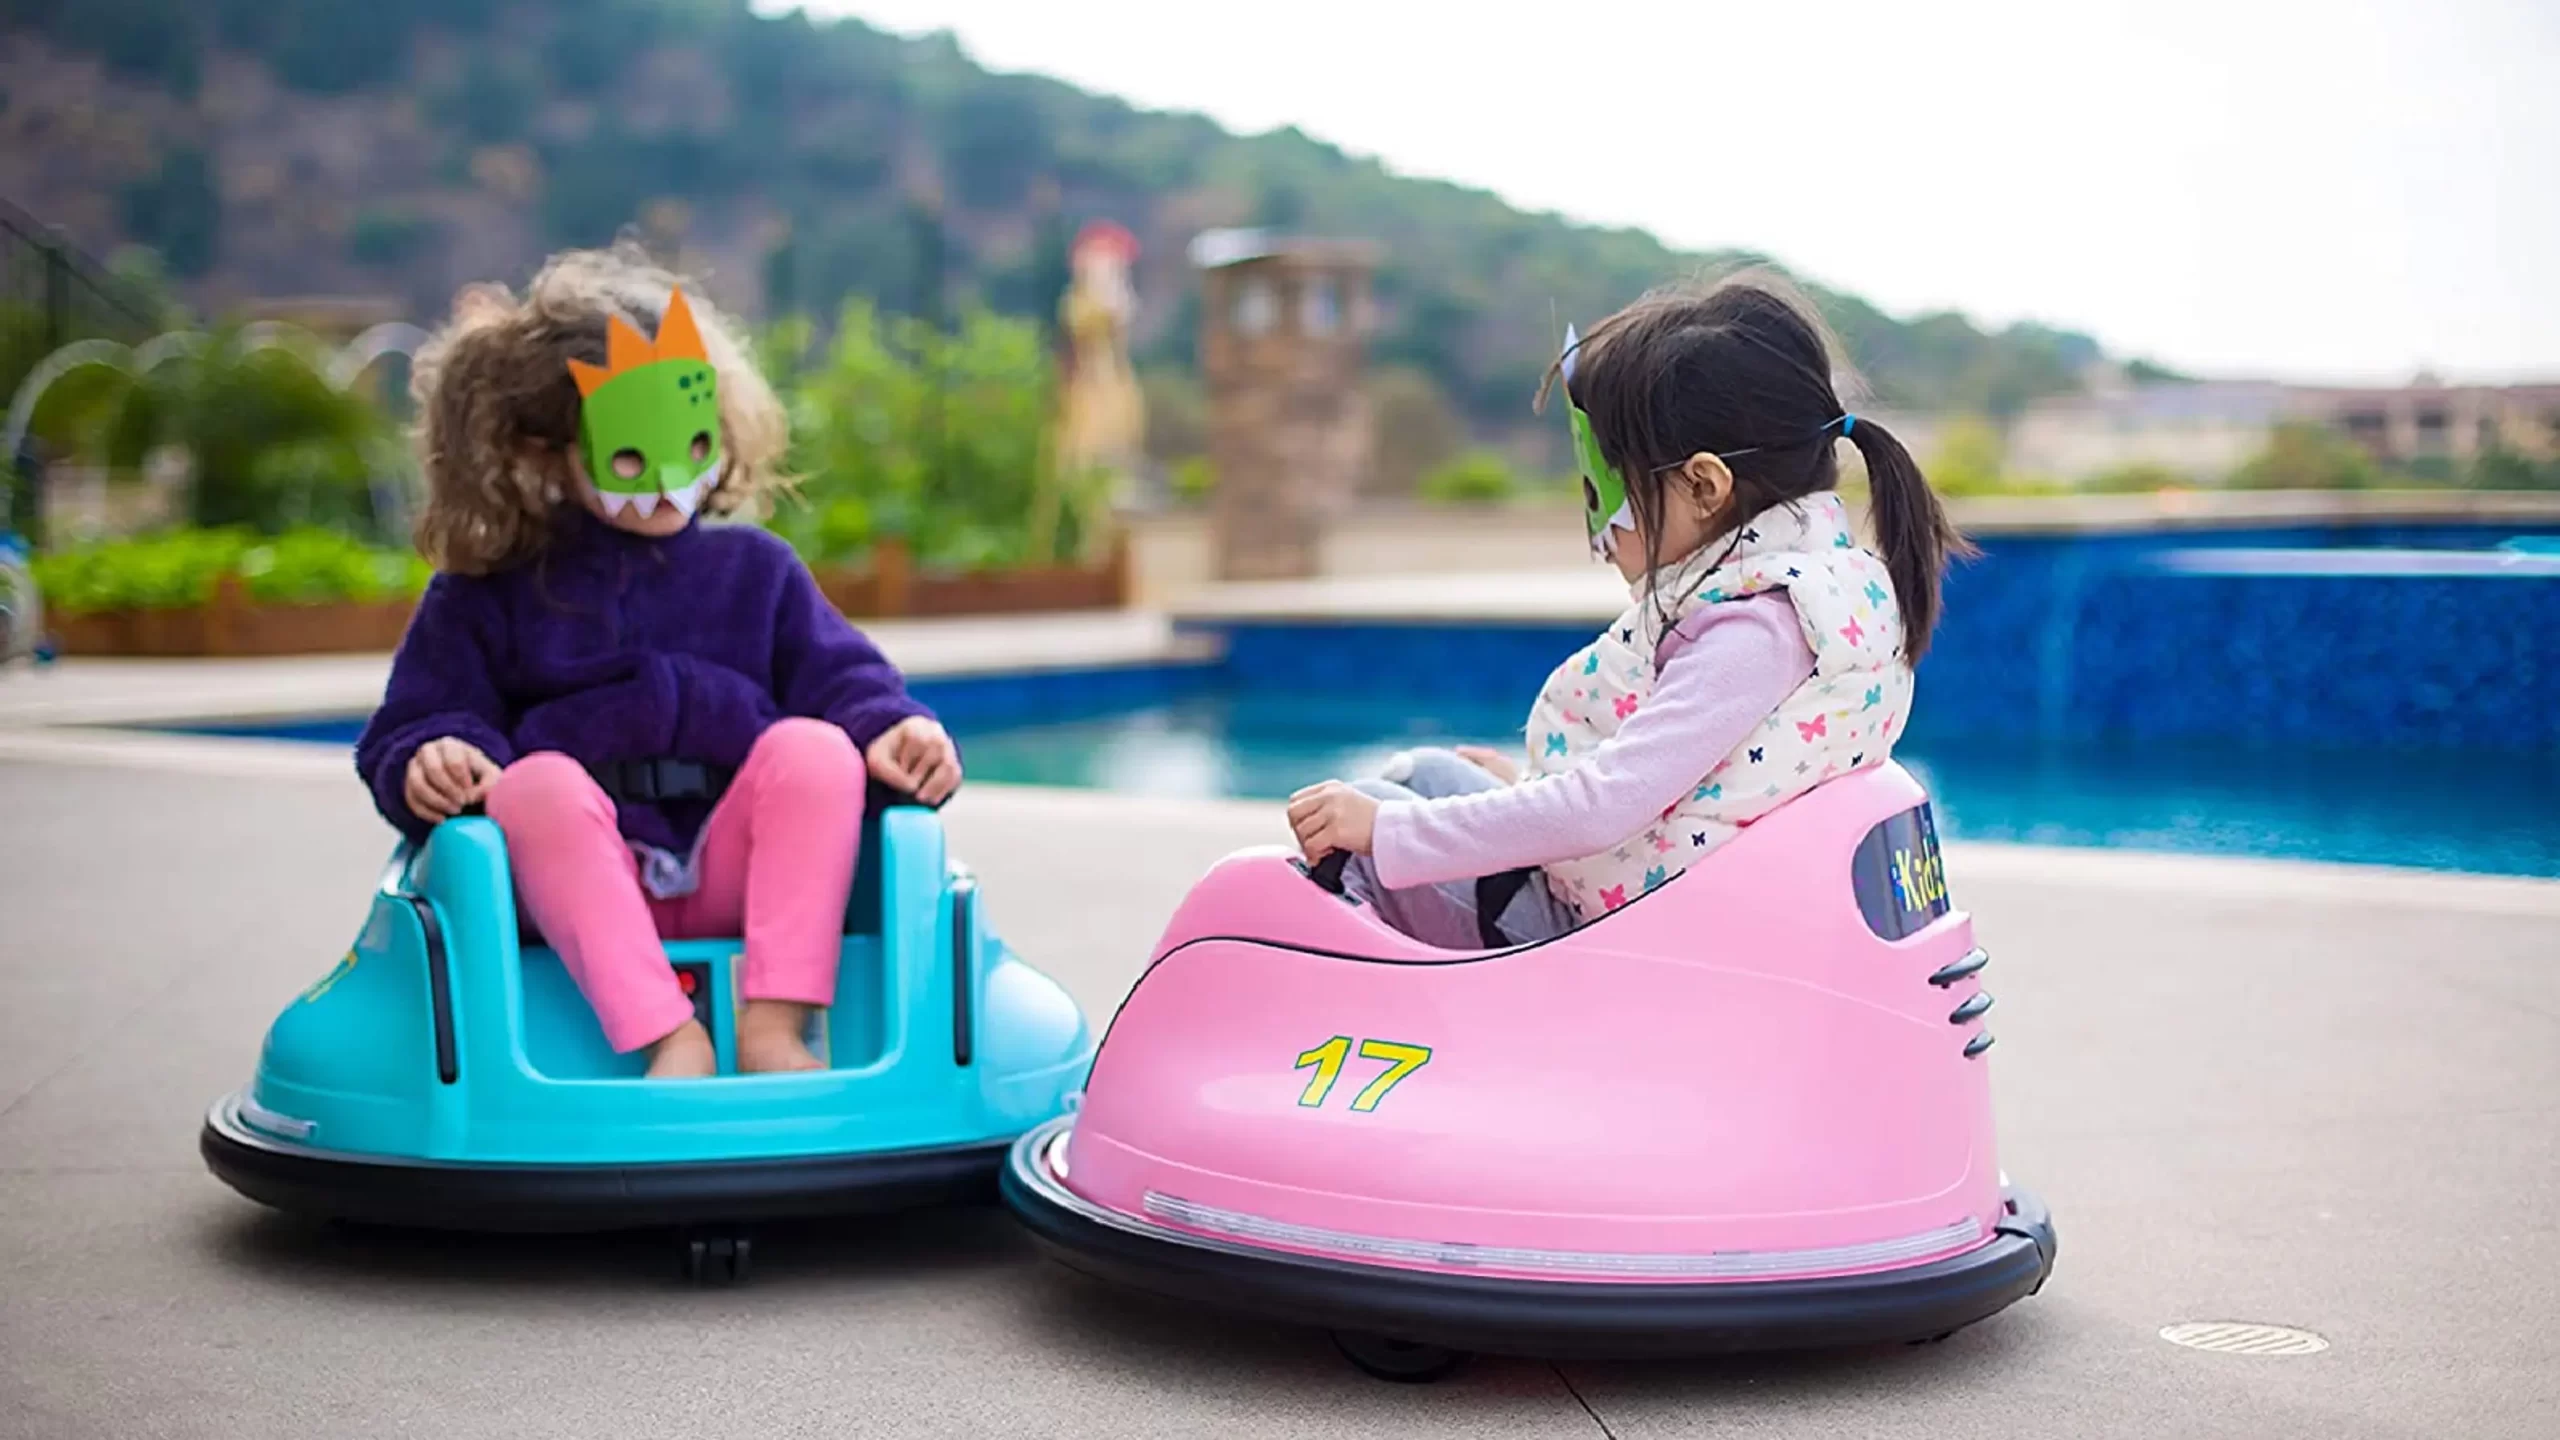 Top 4 Best Bumper Cars for Babies in 2022